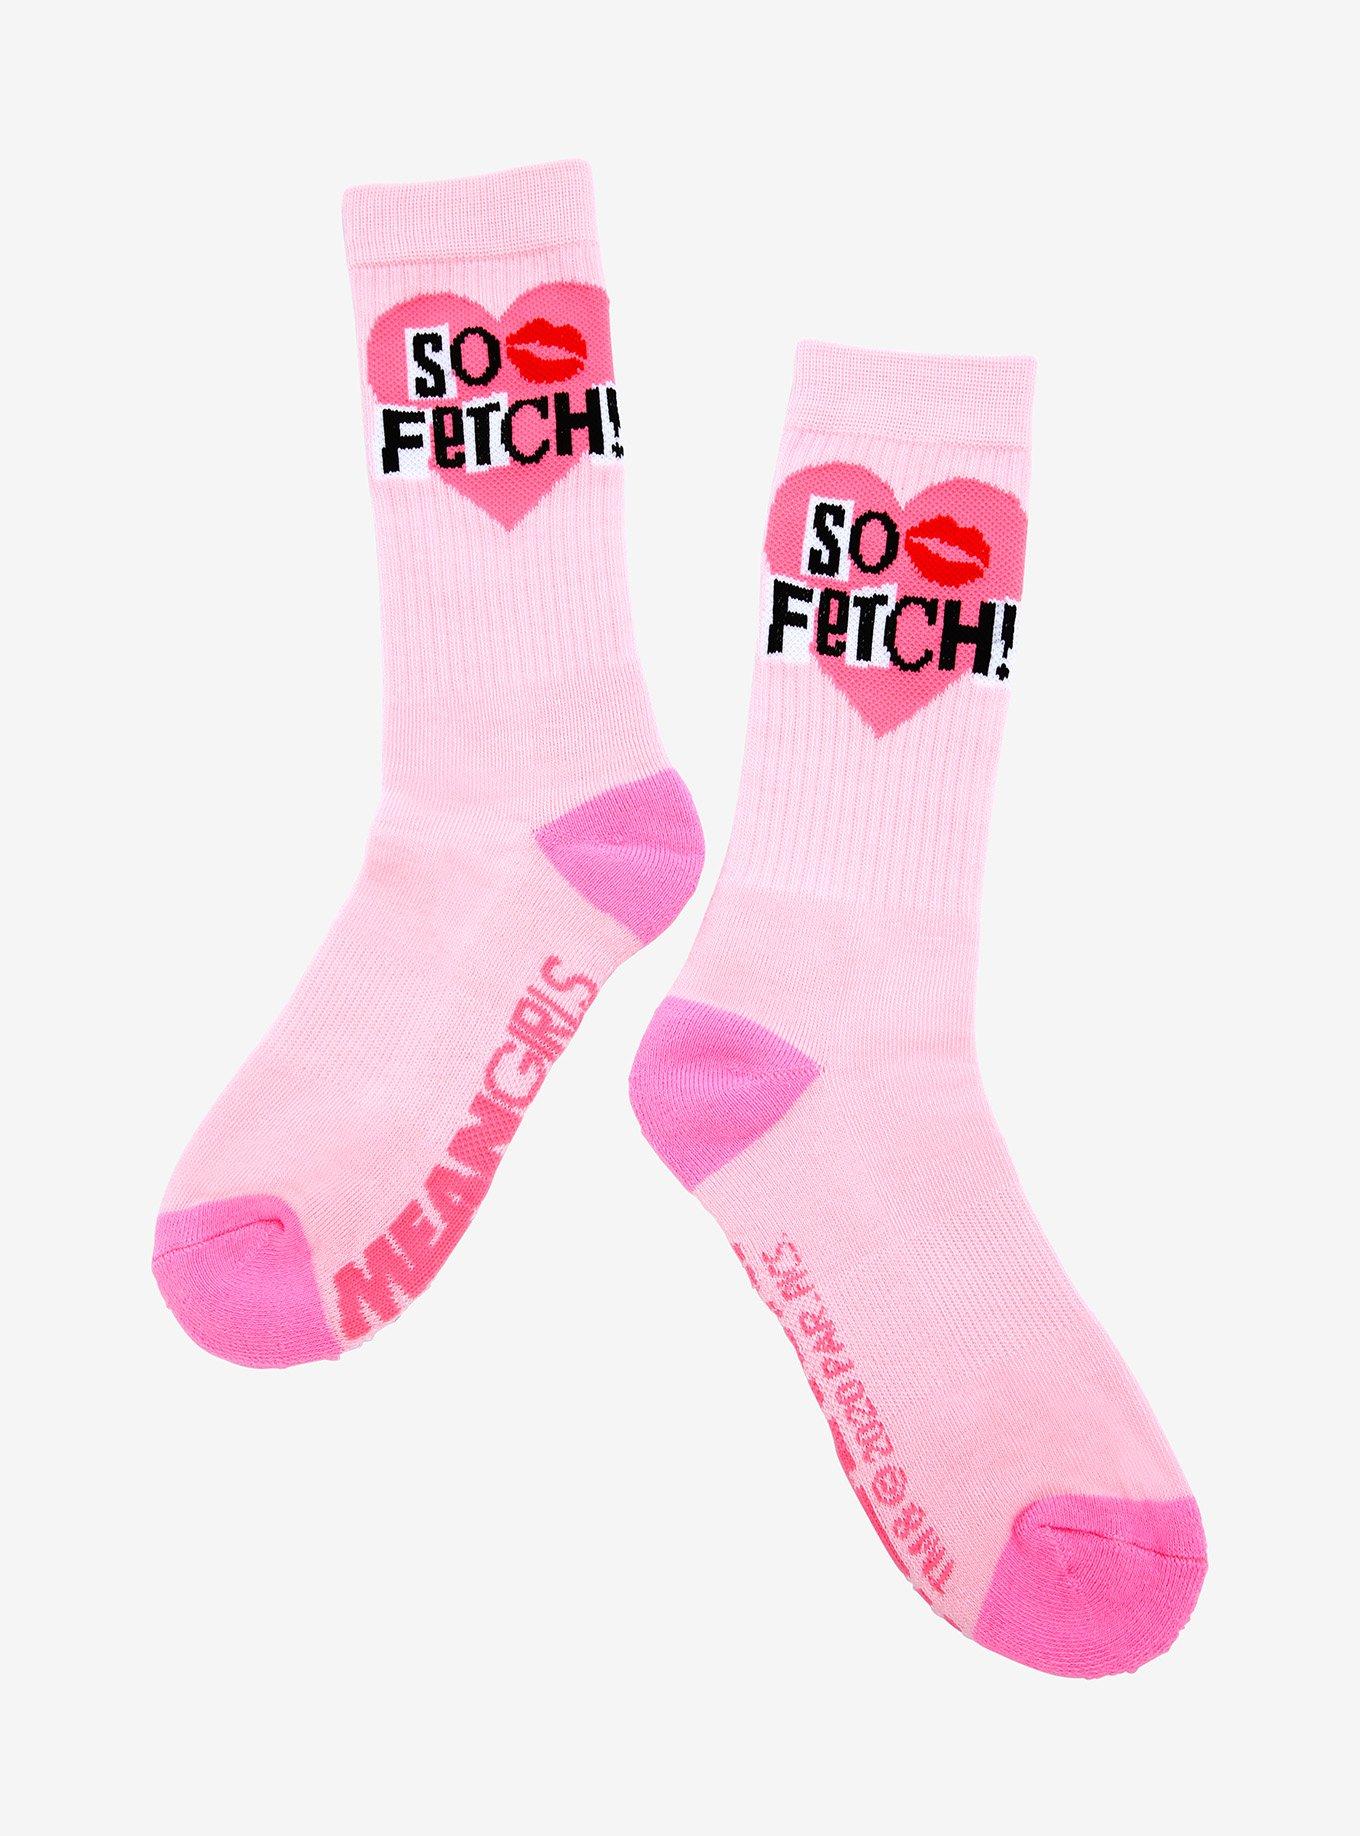 Mean Girls socks and Y2K haul coming #meangirlsmerch #meangirls #early